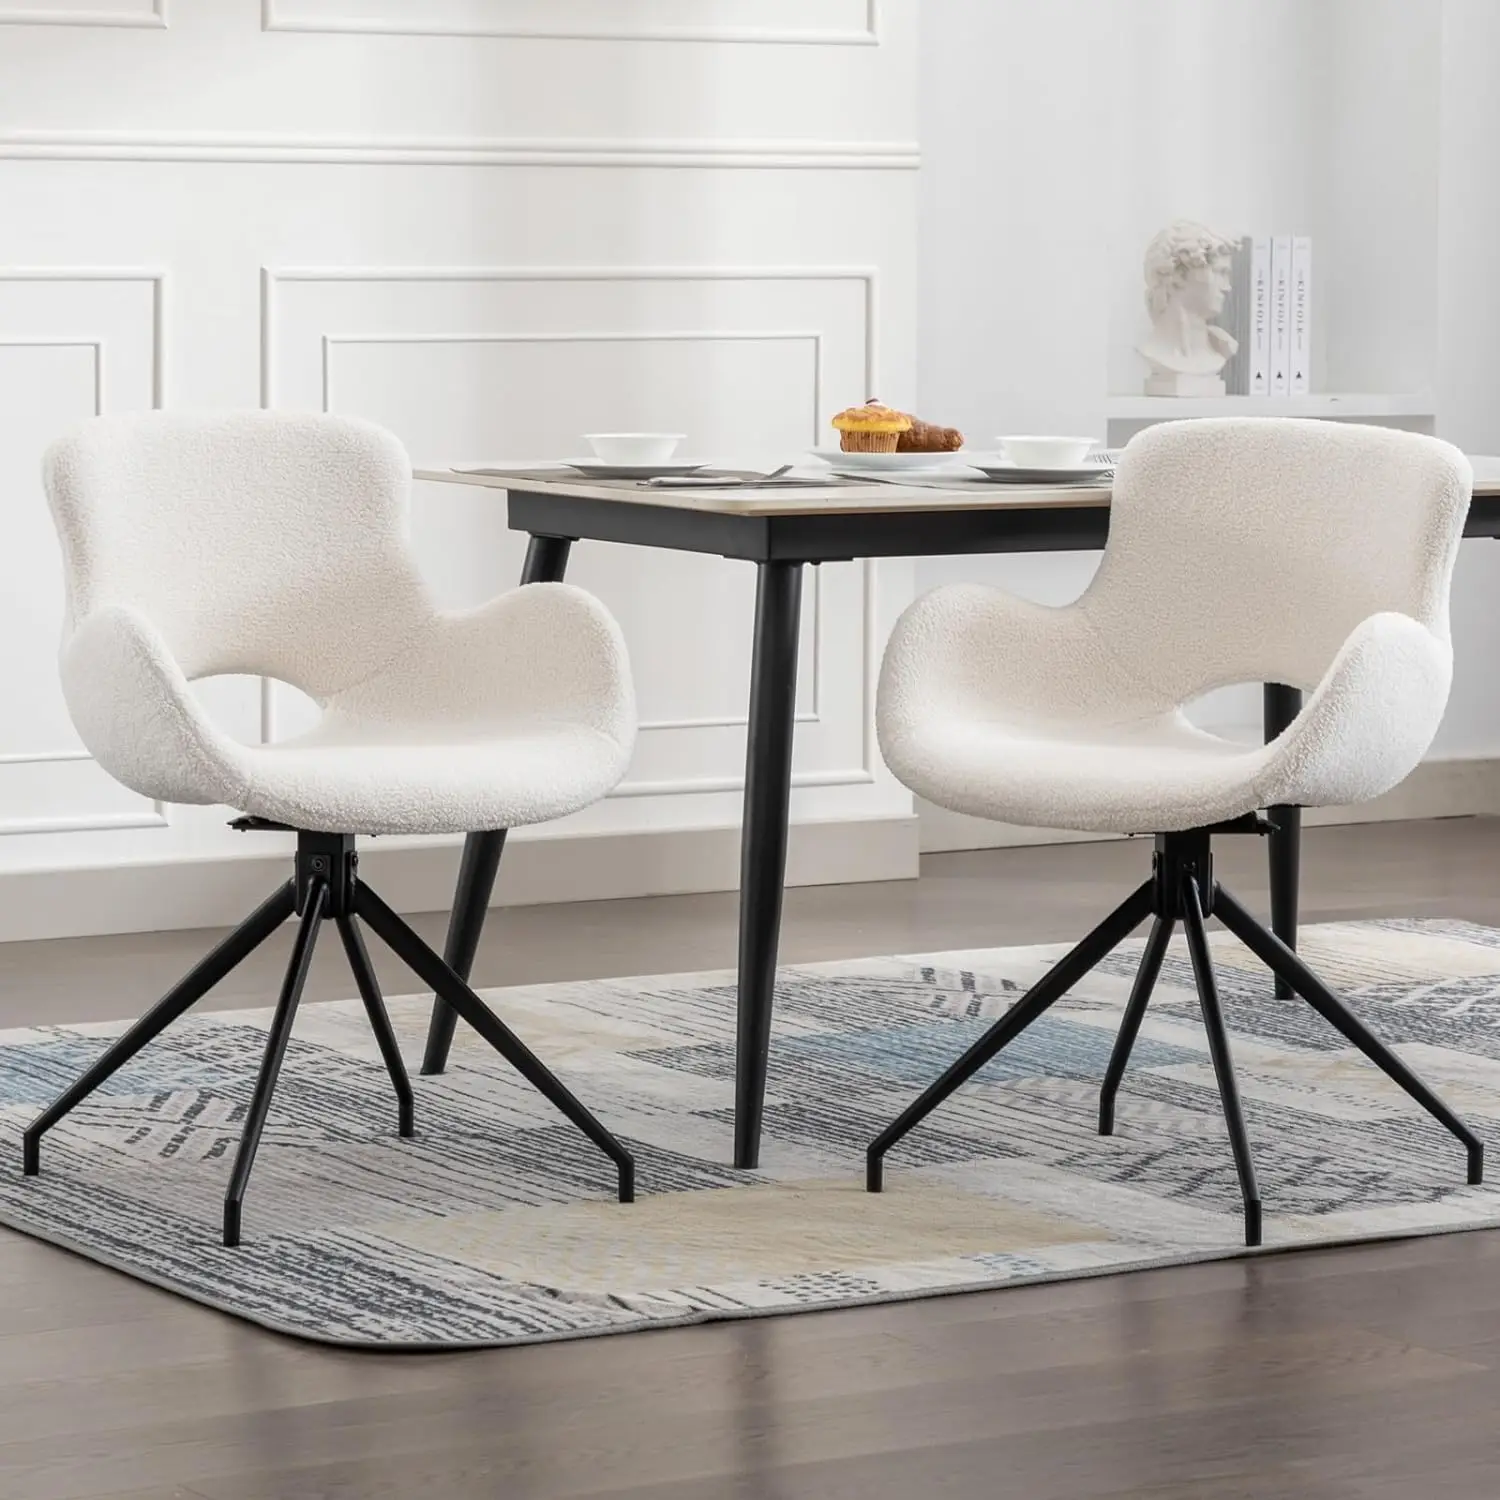 

Swivel Dining Accent Chairs Set of 2, Modern Boucle Dining Chair Upholstered Fuzzy Chair with Arms Black Metal Legs